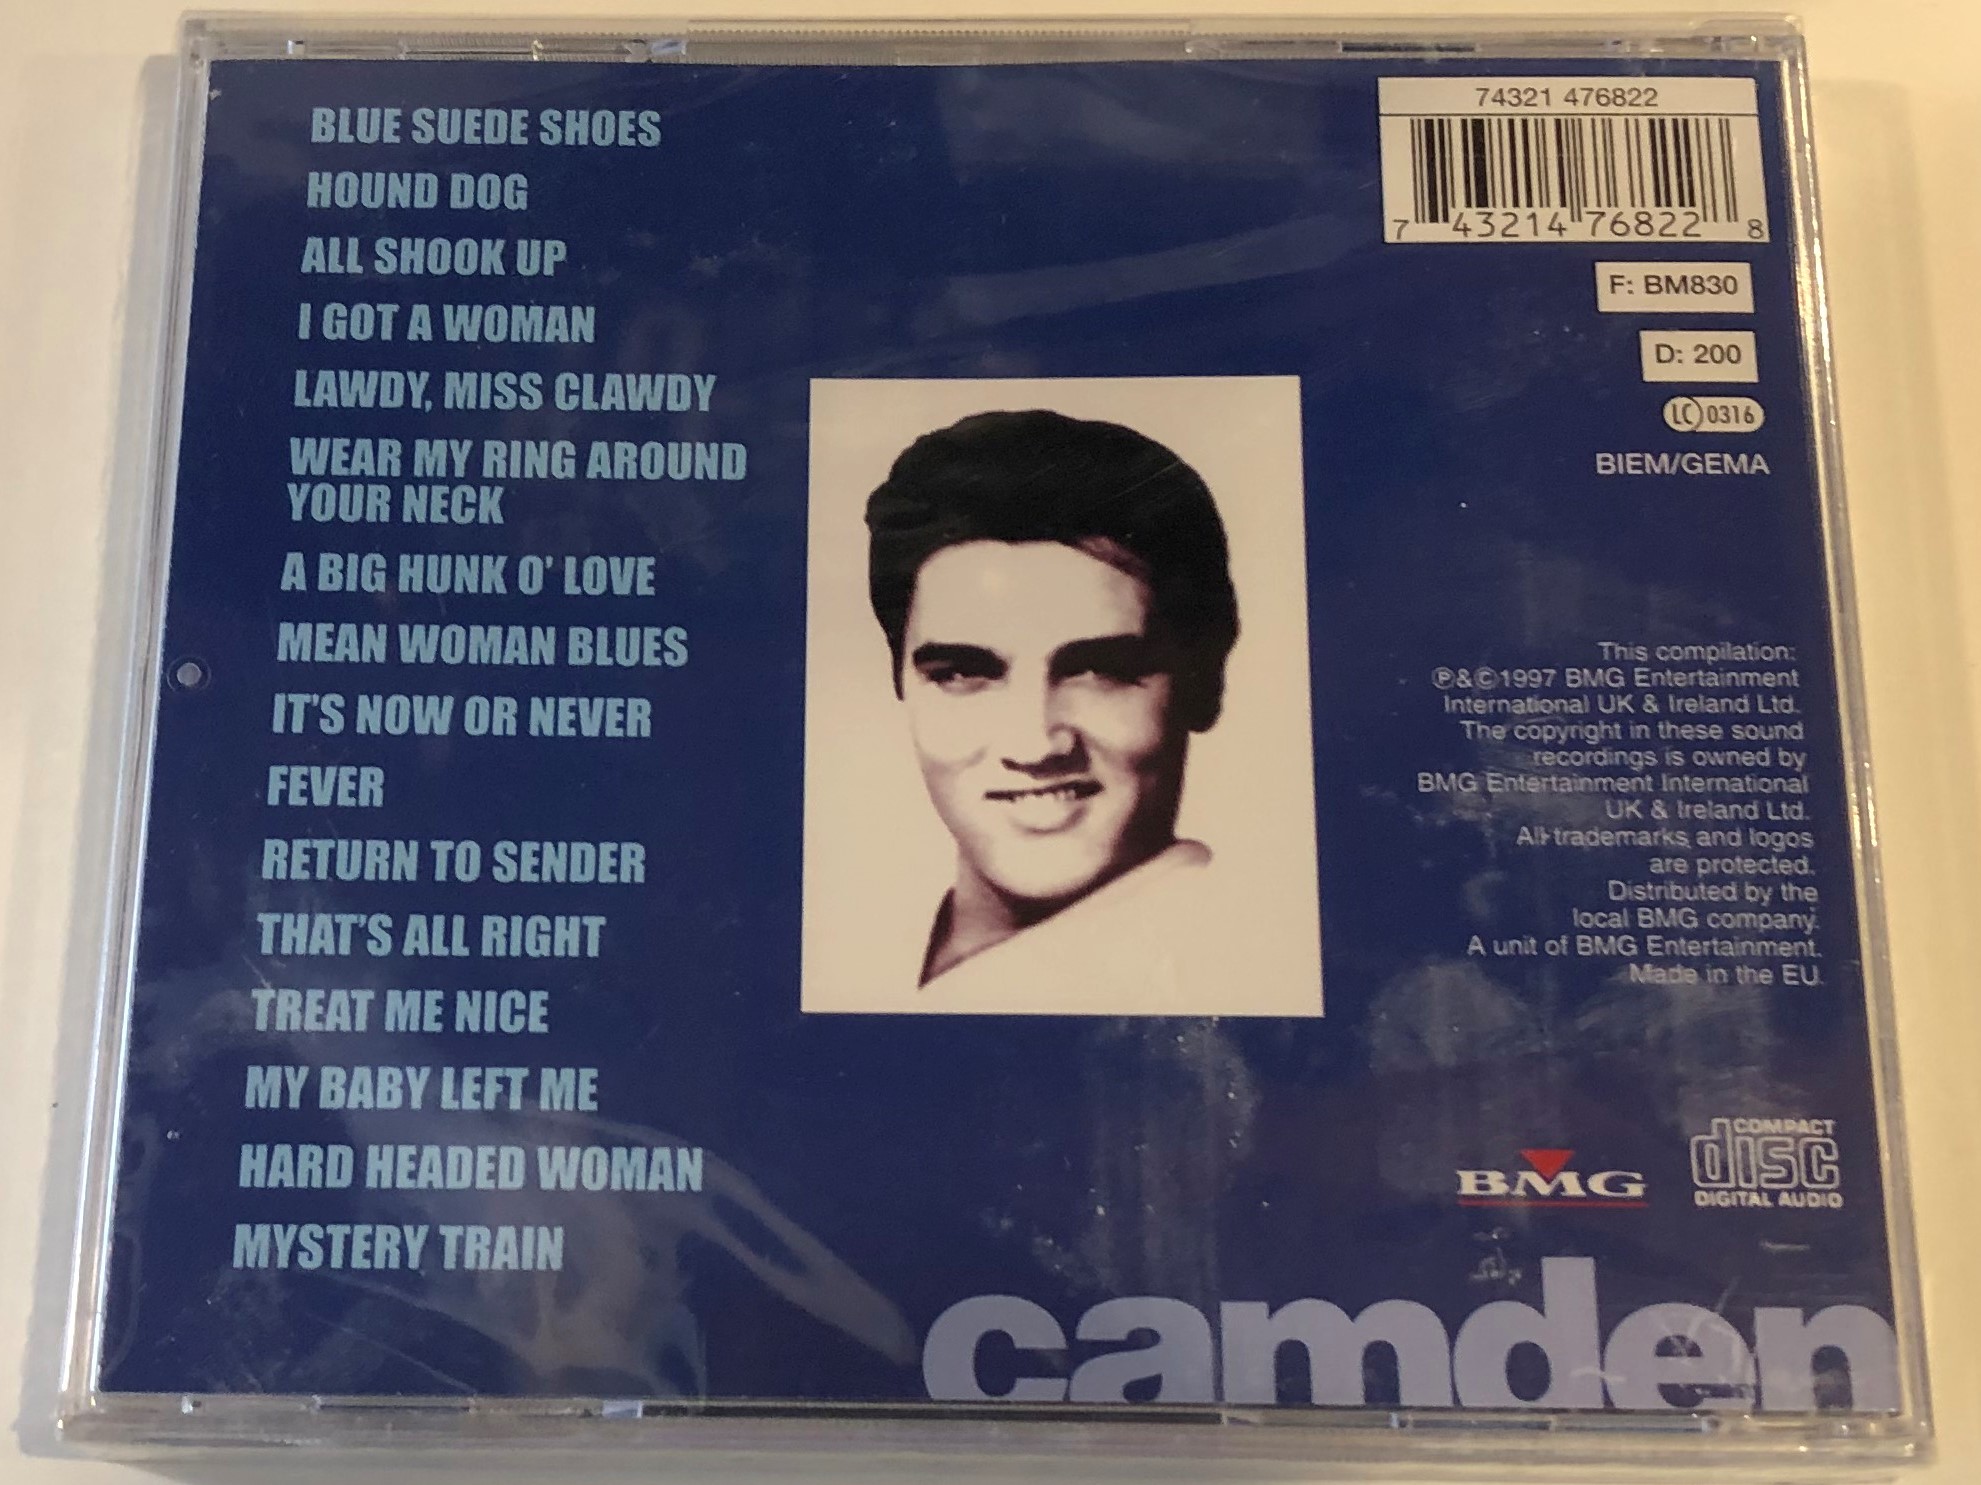 classic-elvis-featuring-blue-suede-shoes-return-to-sender-it-s-now-or-never-all-shook-up-hound-dog-bmg-audio-cd-1997-74321-476822-2-.jpg